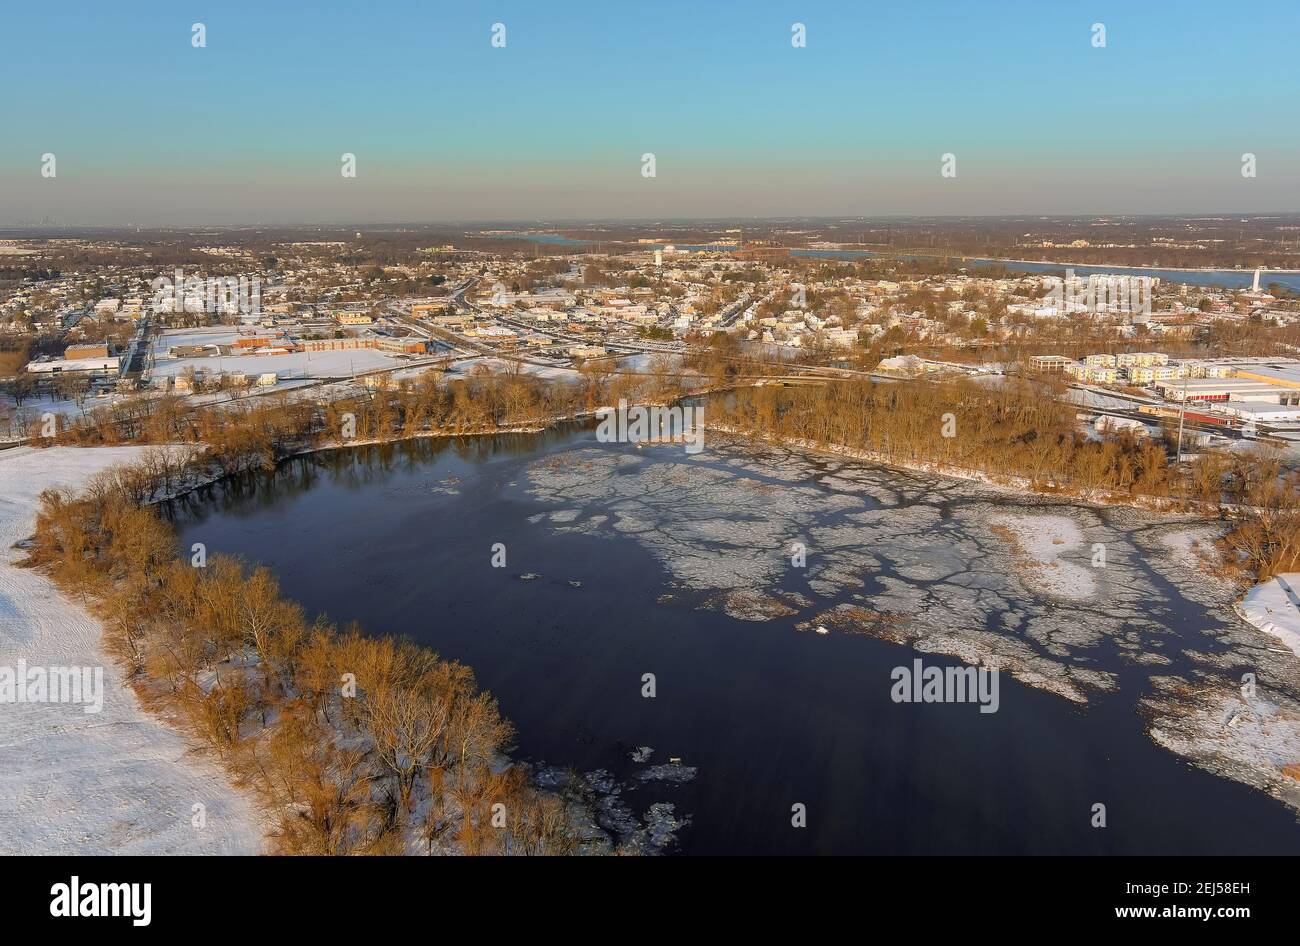 Aerial view of a winter in suburb city with snow covered of Burlington, NJ residential quarters by the Delaware river the American town on after snowfall USA Stock Photo